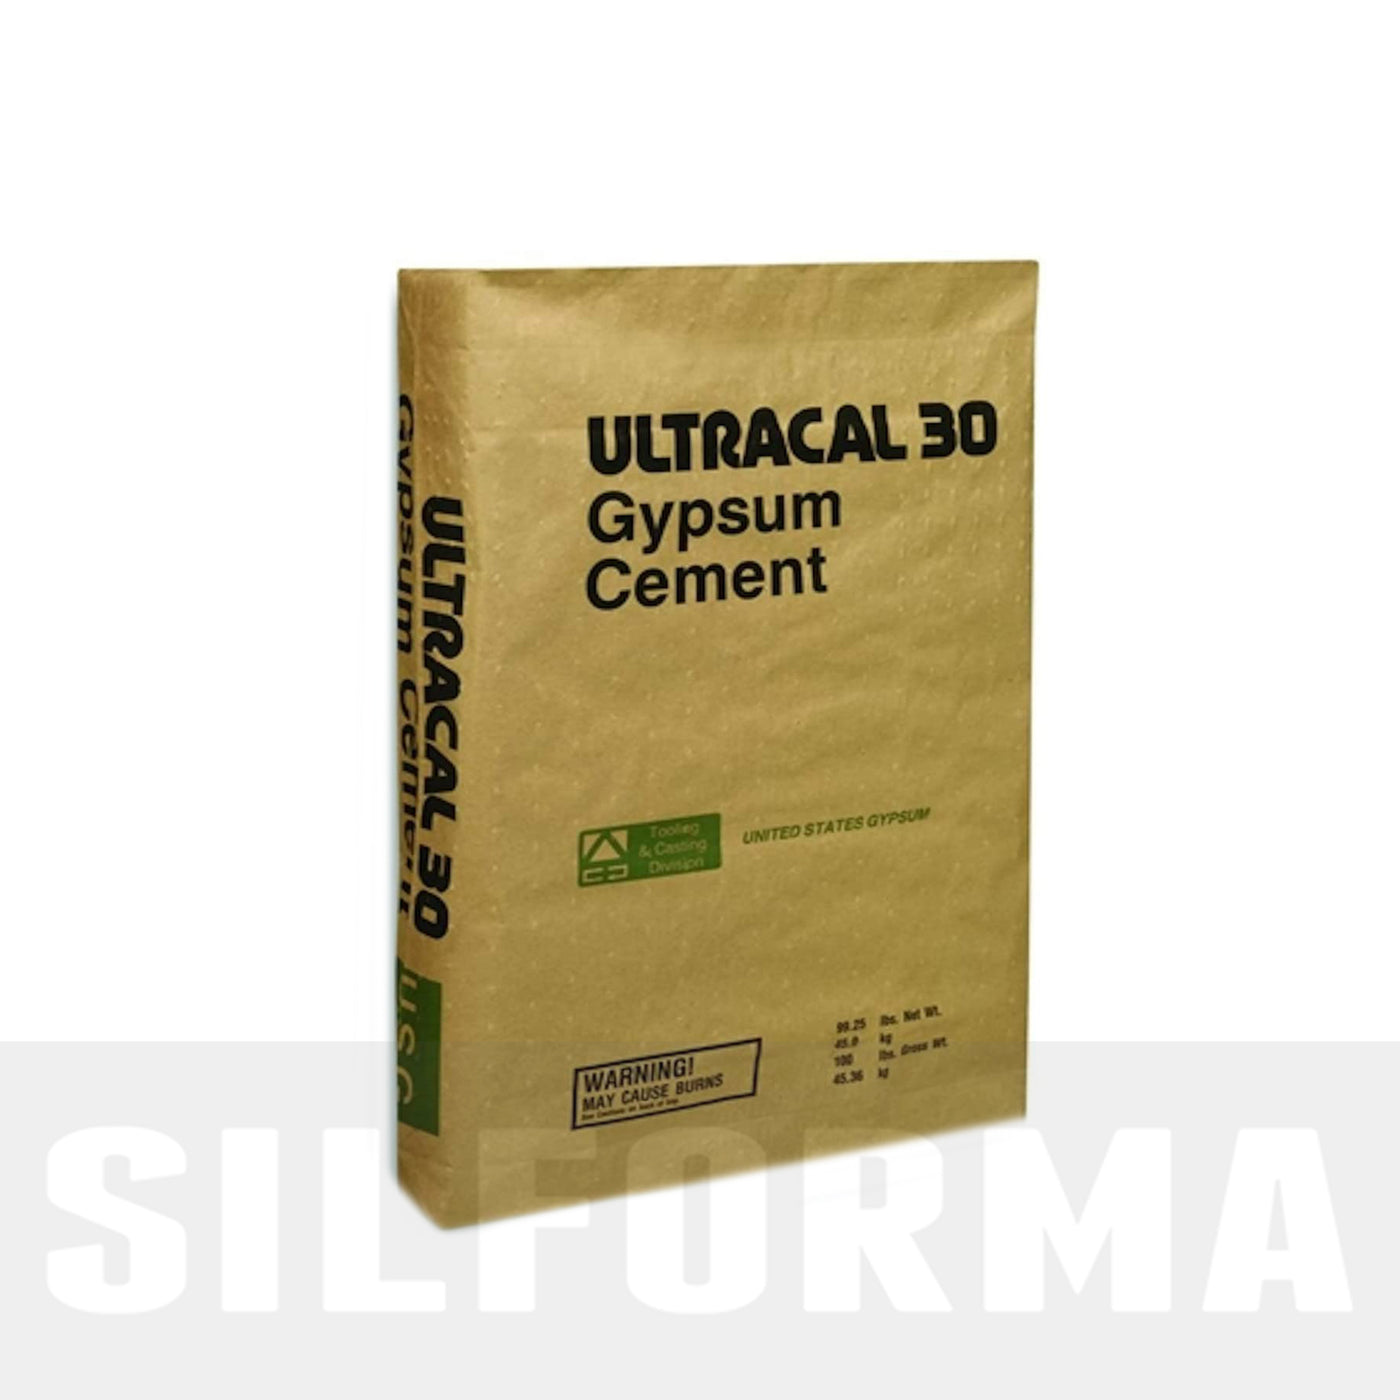 "X-Form" - Super stiprus cementinis gipsas - "UltraCal 30"